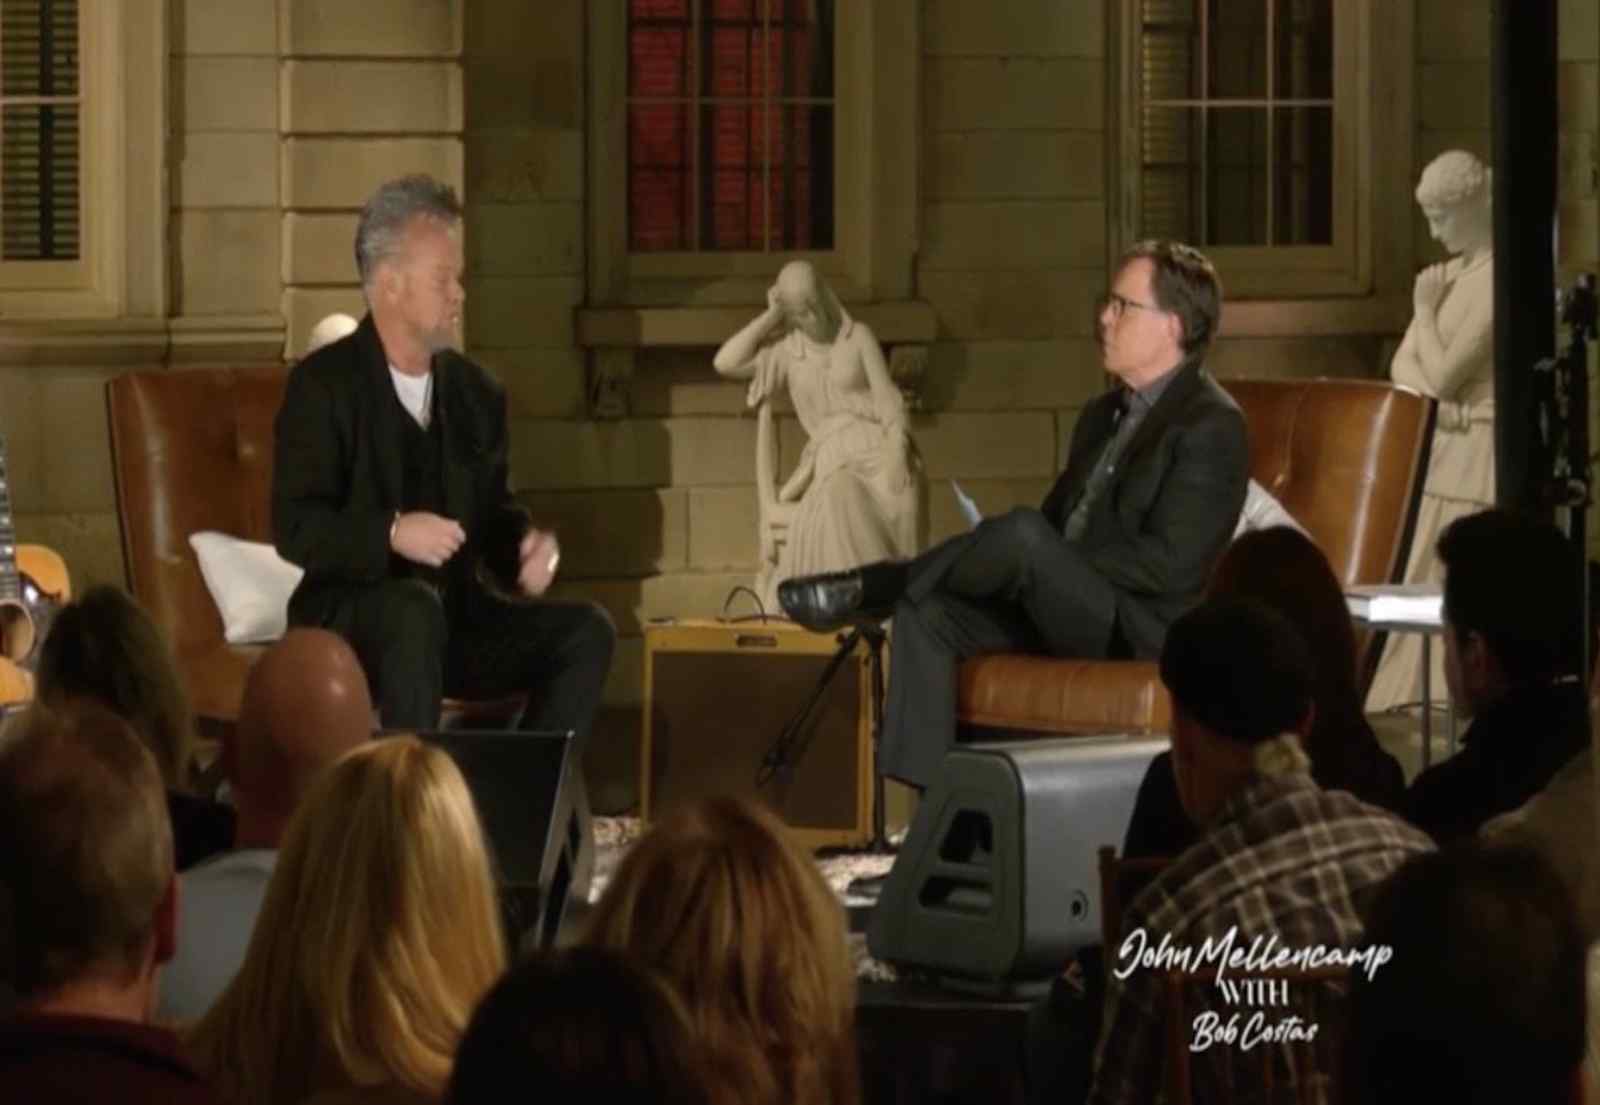 John Mellencamp Discusses Creative Process With Bob Costas At The MET  In New Public TV Series, "With"